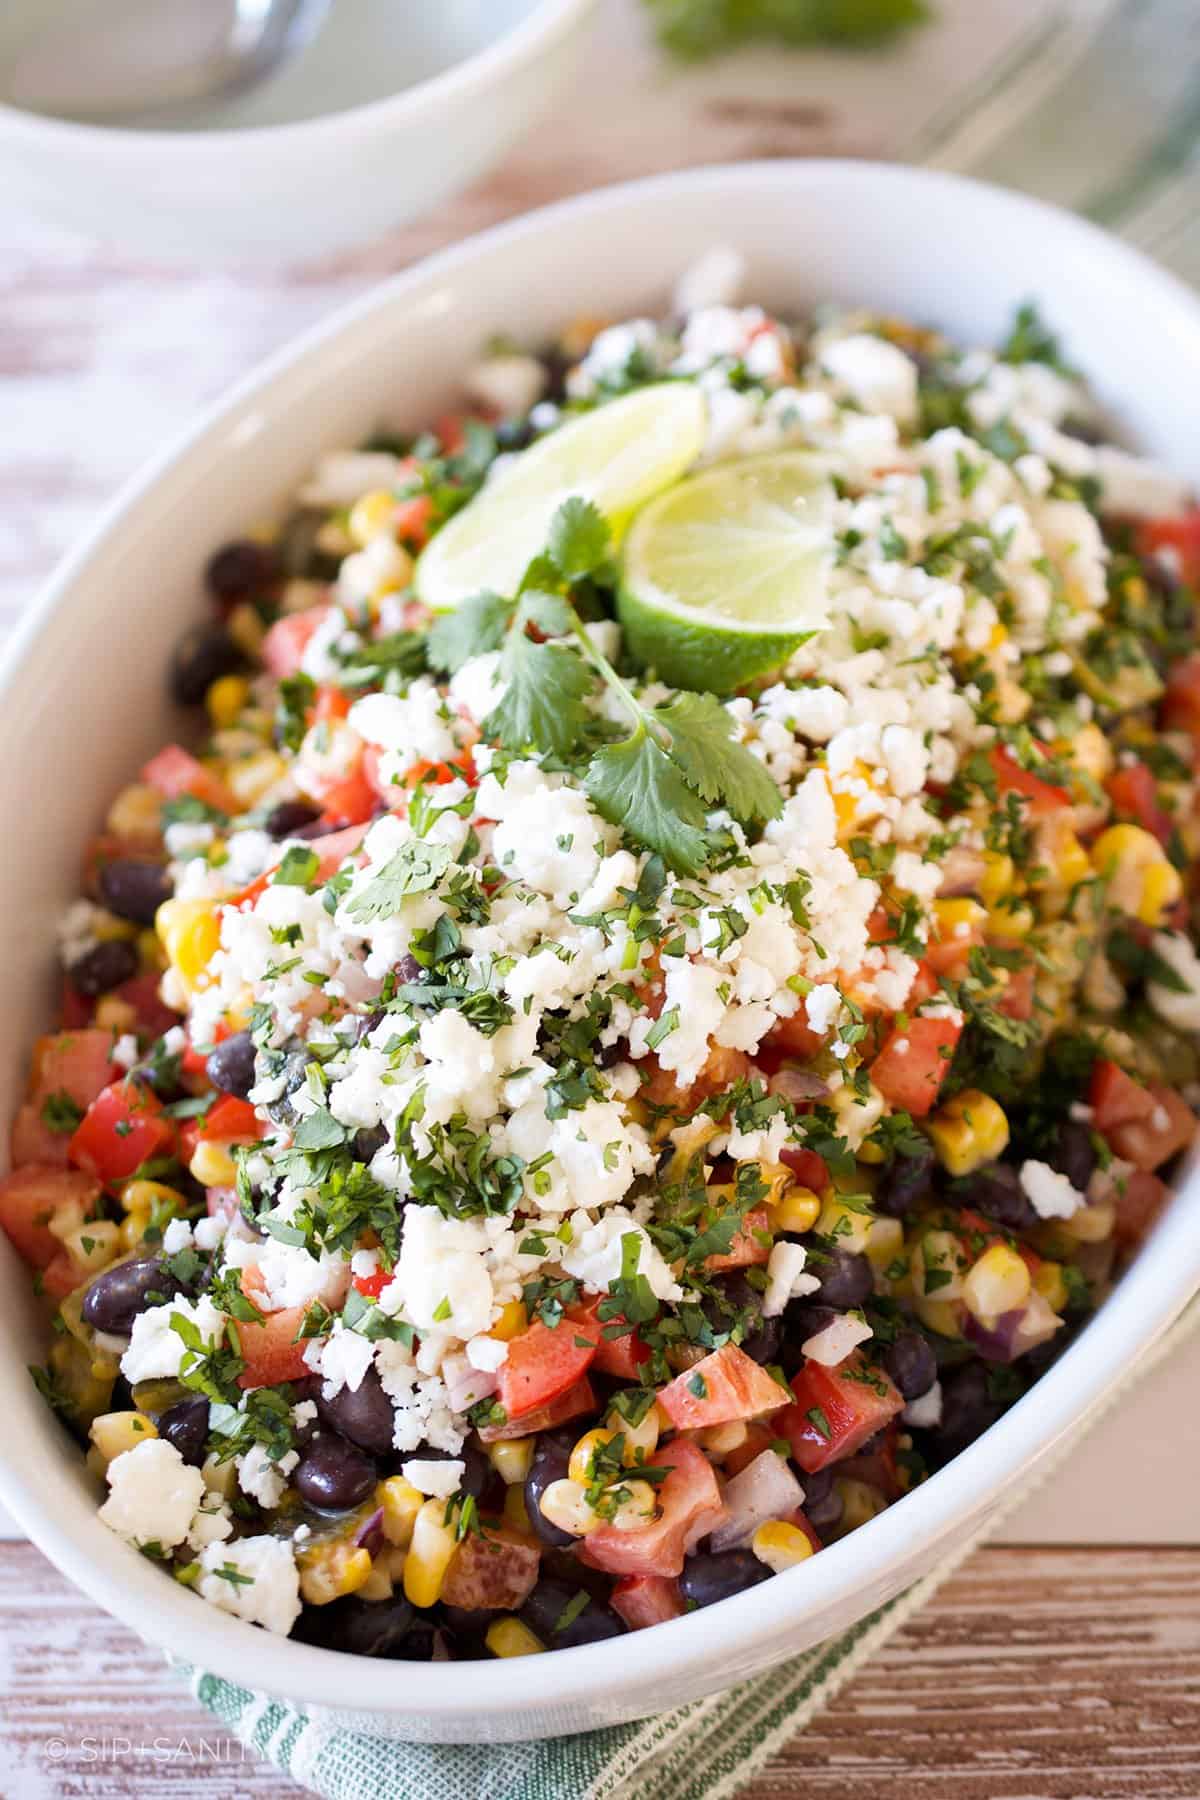 Charred corn salad with black beans in a white dish on a wood table.